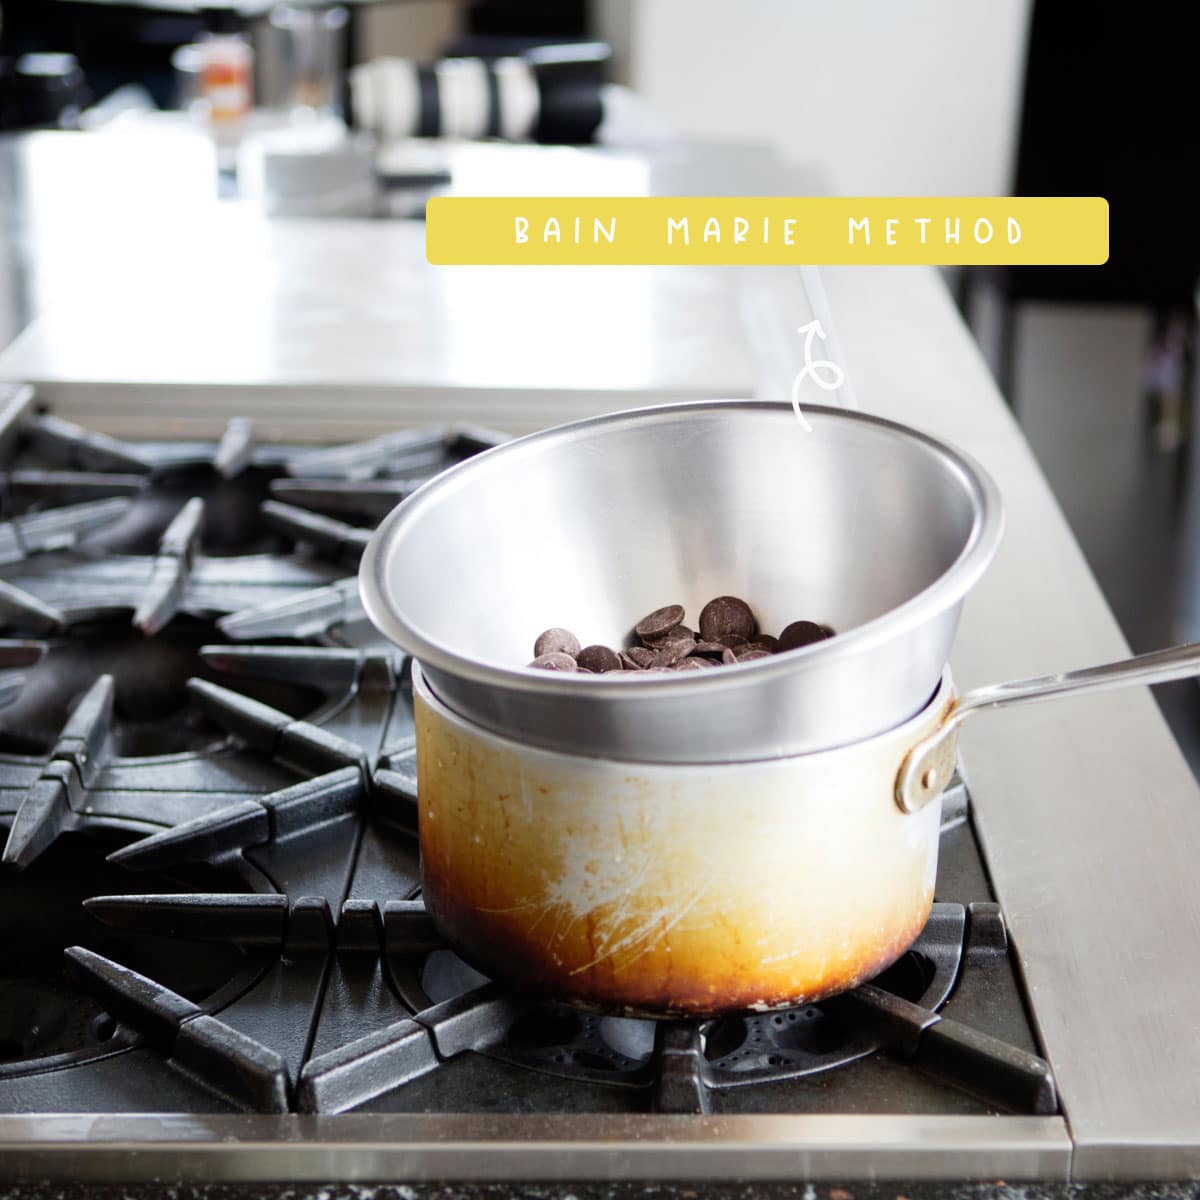 Using bain-marie is a good option for reheating nacho cheese because it is a gentle way to heat the cheese and prevents it from burning.